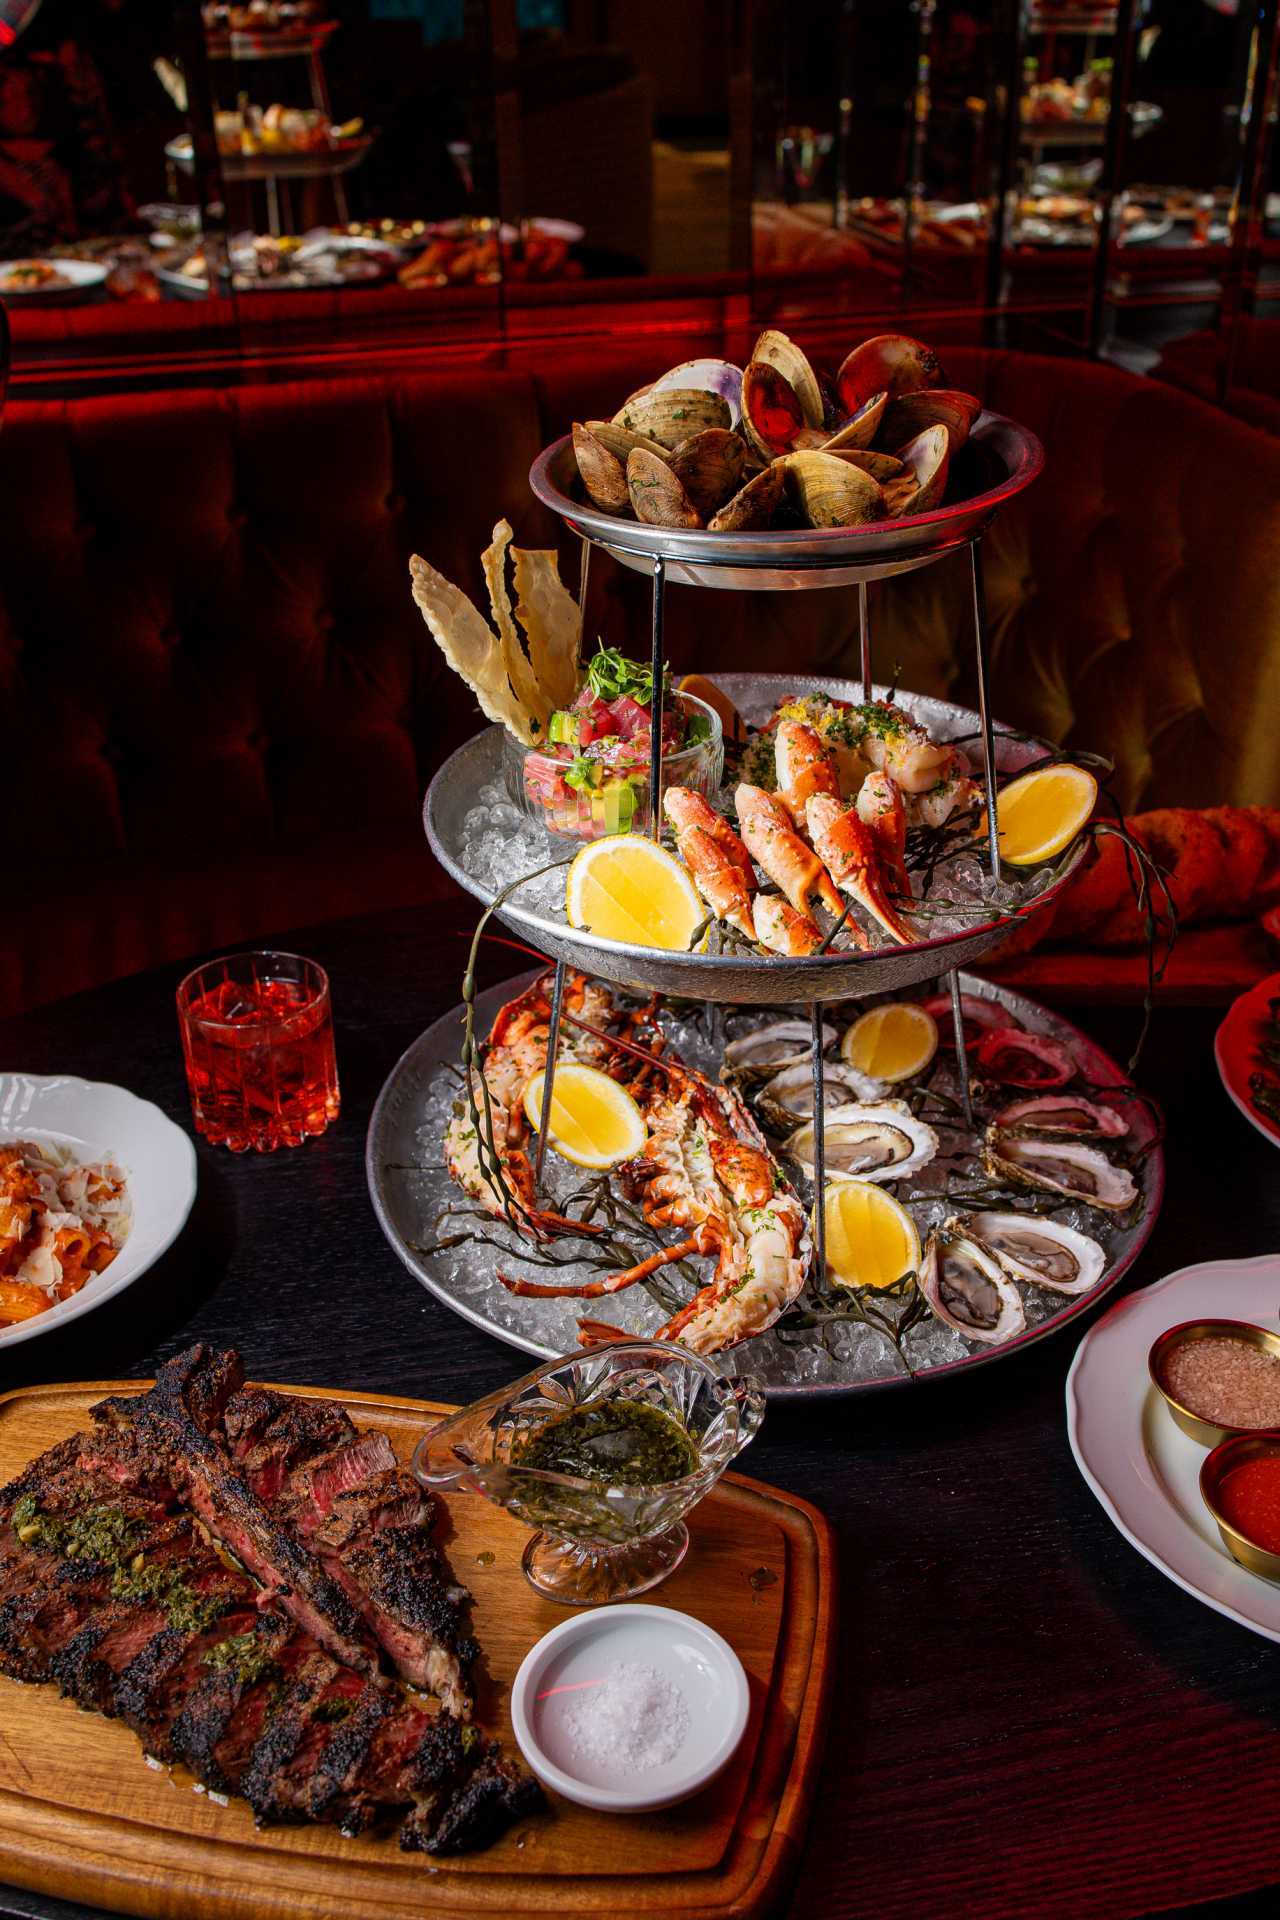 A seafood tower and a steak at Maxime's restaurant in Toronto